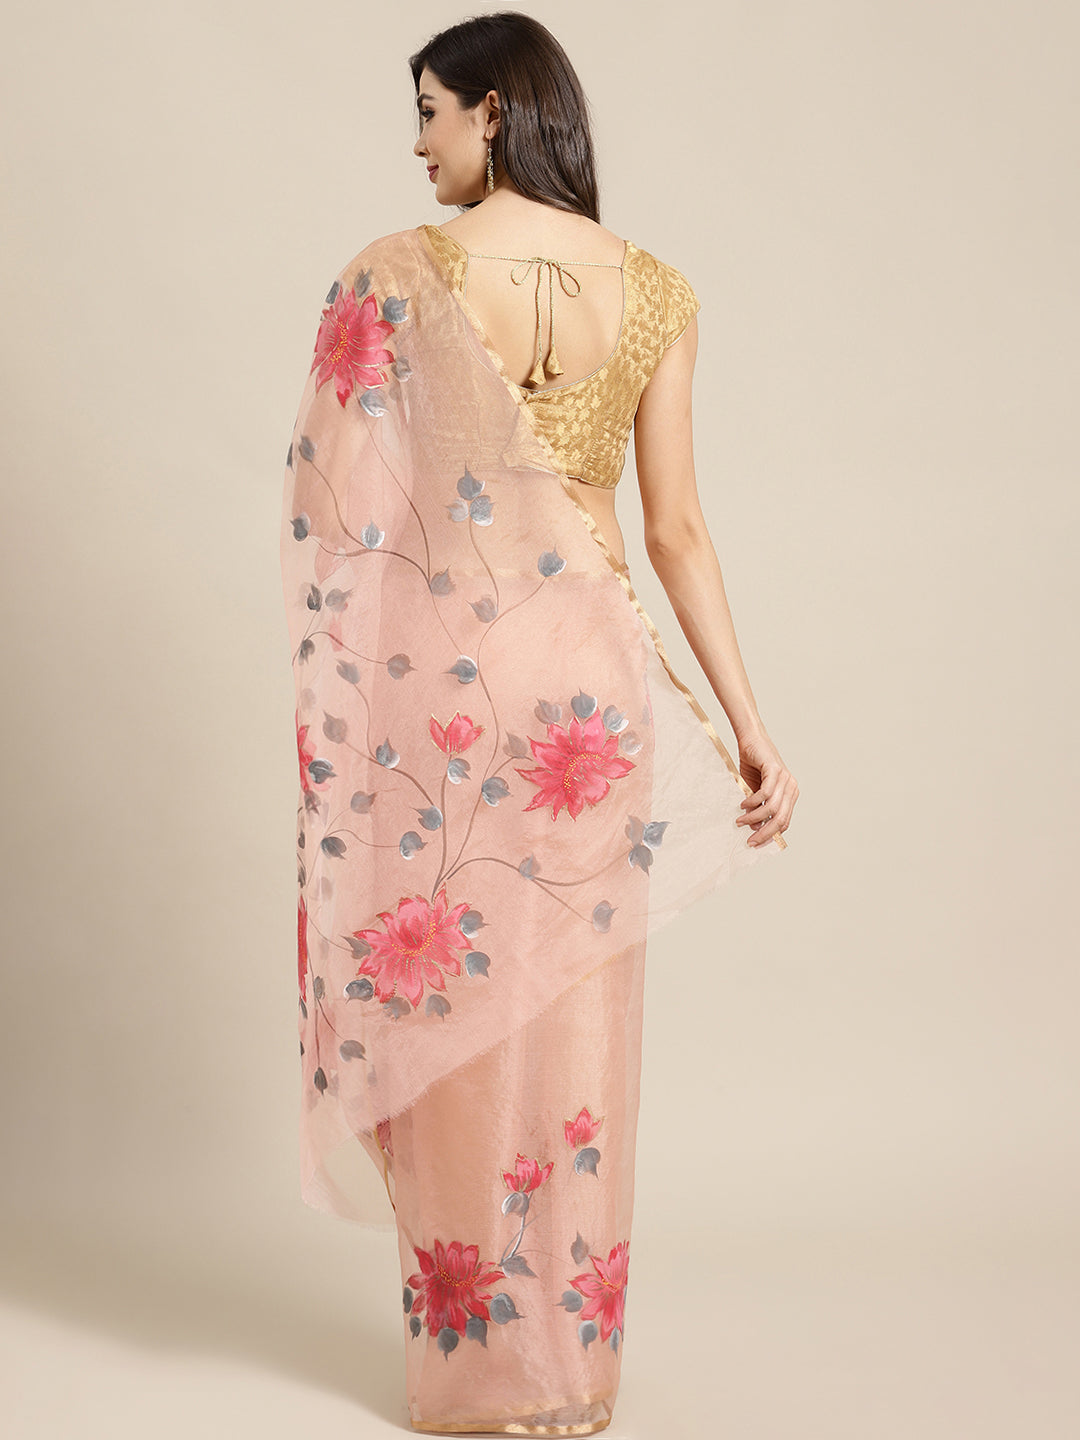 Pink and Grey, Kalakari India Bagru Organza Solid Saree with Blouse BHKPSA0141-Saree-Kalakari India-BHKPSA0141-Geographical Indication, Hand Crafted, Hand Painted, Heritage Prints, Natural Dyes, Organza, Red, Sarees, Sustainable Fabrics, Woven, Yellow-[Linen,Ethnic,wear,Fashionista,Handloom,Handicraft,Indigo,blockprint,block,print,Cotton,Chanderi,Blue, latest,classy,party,bollywood,trendy,summer,style,traditional,formal,elegant,unique,style,hand,block,print, dabu,booti,gift,present,glamorous,aff